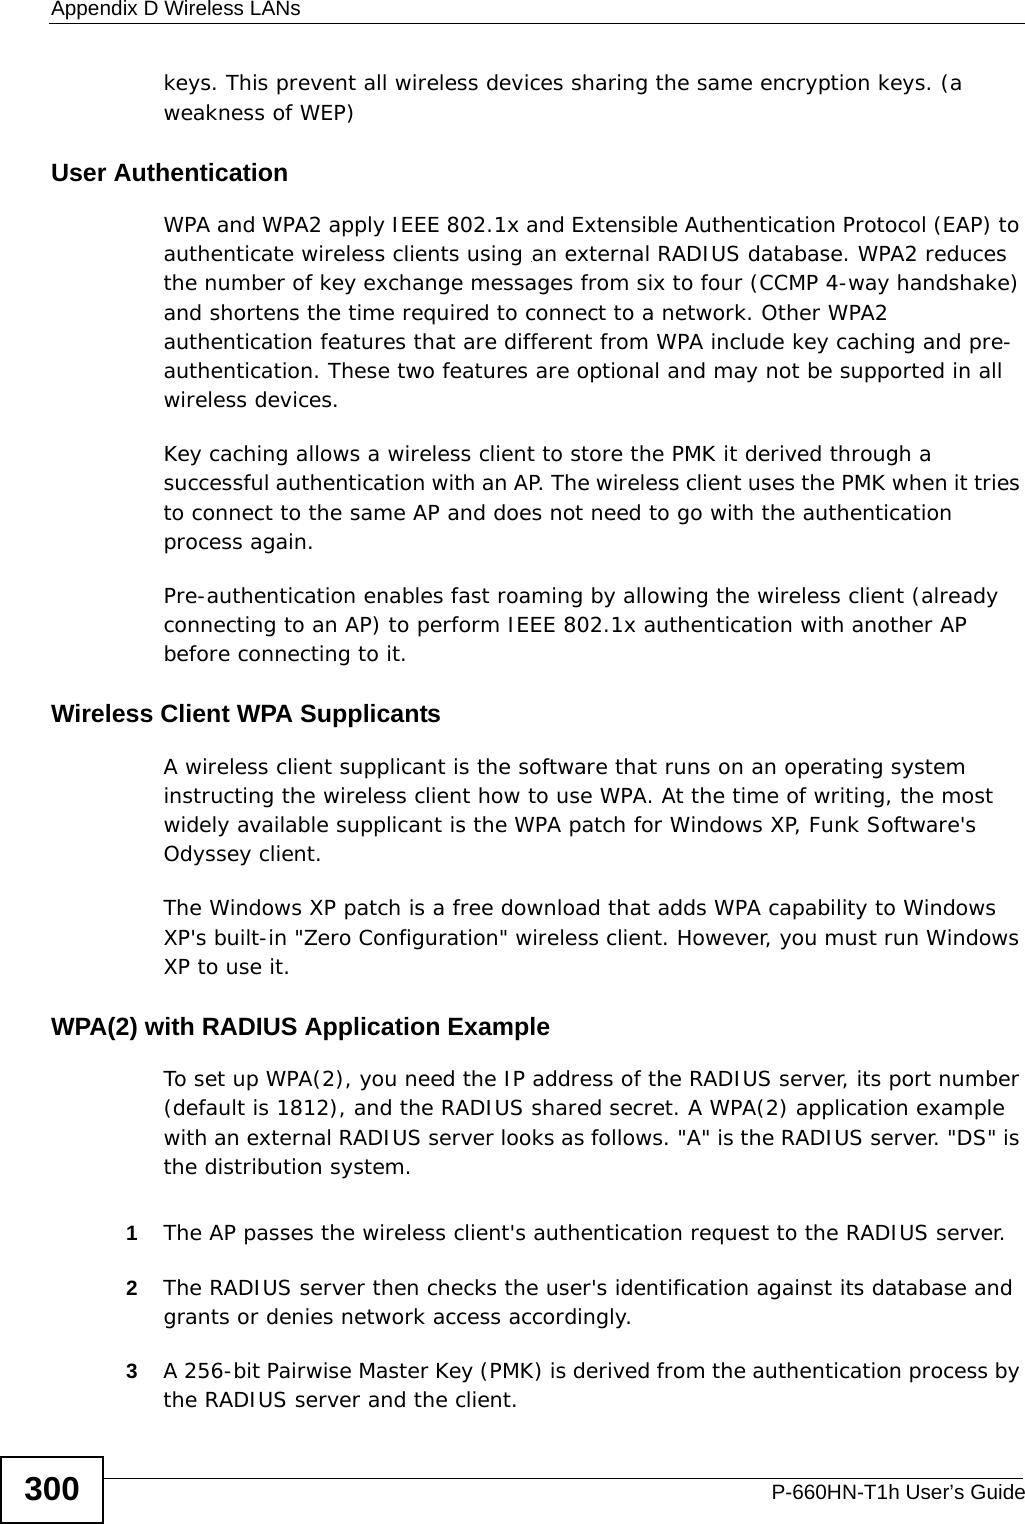 Appendix D Wireless LANsP-660HN-T1h User’s Guide300keys. This prevent all wireless devices sharing the same encryption keys. (a weakness of WEP)User Authentication WPA and WPA2 apply IEEE 802.1x and Extensible Authentication Protocol (EAP) to authenticate wireless clients using an external RADIUS database. WPA2 reduces the number of key exchange messages from six to four (CCMP 4-way handshake) and shortens the time required to connect to a network. Other WPA2 authentication features that are different from WPA include key caching and pre-authentication. These two features are optional and may not be supported in all wireless devices.Key caching allows a wireless client to store the PMK it derived through a successful authentication with an AP. The wireless client uses the PMK when it tries to connect to the same AP and does not need to go with the authentication process again.Pre-authentication enables fast roaming by allowing the wireless client (already connecting to an AP) to perform IEEE 802.1x authentication with another AP before connecting to it.Wireless Client WPA SupplicantsA wireless client supplicant is the software that runs on an operating system instructing the wireless client how to use WPA. At the time of writing, the most widely available supplicant is the WPA patch for Windows XP, Funk Software&apos;s Odyssey client. The Windows XP patch is a free download that adds WPA capability to Windows XP&apos;s built-in &quot;Zero Configuration&quot; wireless client. However, you must run Windows XP to use it. WPA(2) with RADIUS Application ExampleTo set up WPA(2), you need the IP address of the RADIUS server, its port number (default is 1812), and the RADIUS shared secret. A WPA(2) application example with an external RADIUS server looks as follows. &quot;A&quot; is the RADIUS server. &quot;DS&quot; is the distribution system.1The AP passes the wireless client&apos;s authentication request to the RADIUS server.2The RADIUS server then checks the user&apos;s identification against its database and grants or denies network access accordingly.3A 256-bit Pairwise Master Key (PMK) is derived from the authentication process by the RADIUS server and the client.